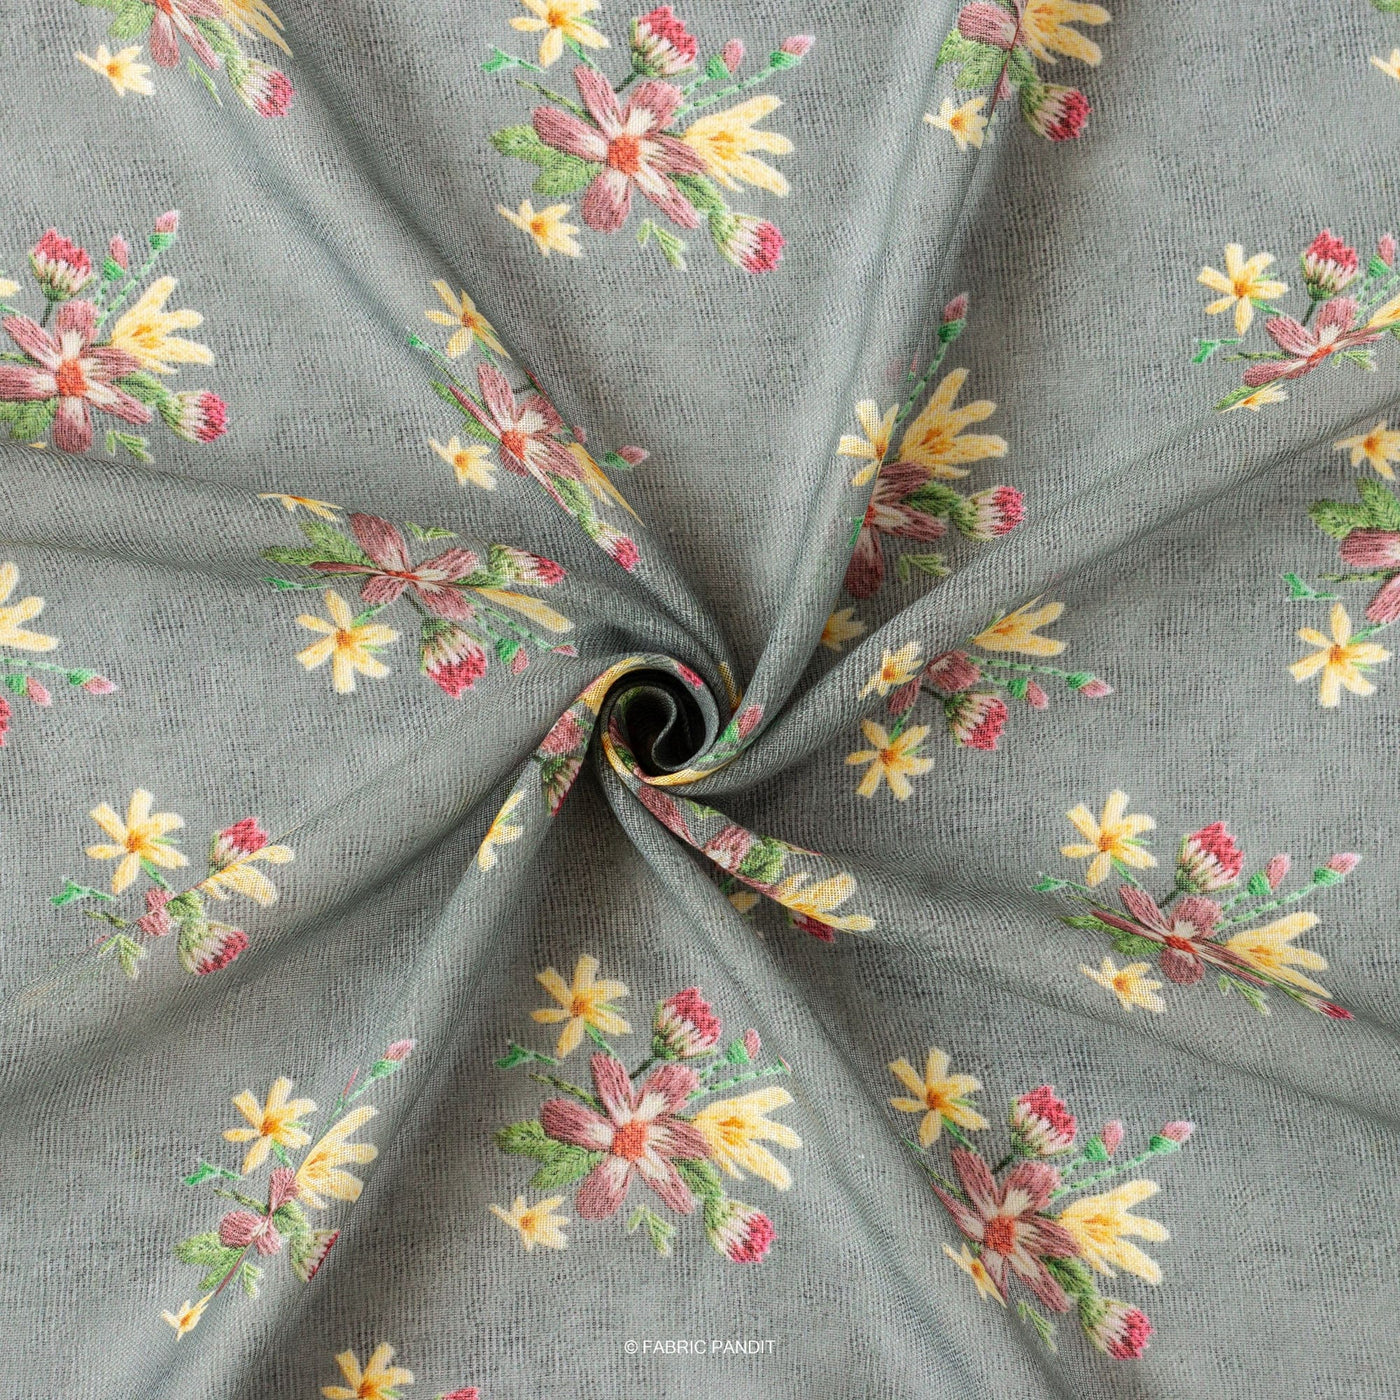 Fabric Pandit Cut Piece 0.25M (CUT PIECE) Grey and Yellow Flower Bunch Digital Printed Linen Neps Fabric (Width 44 Inches)